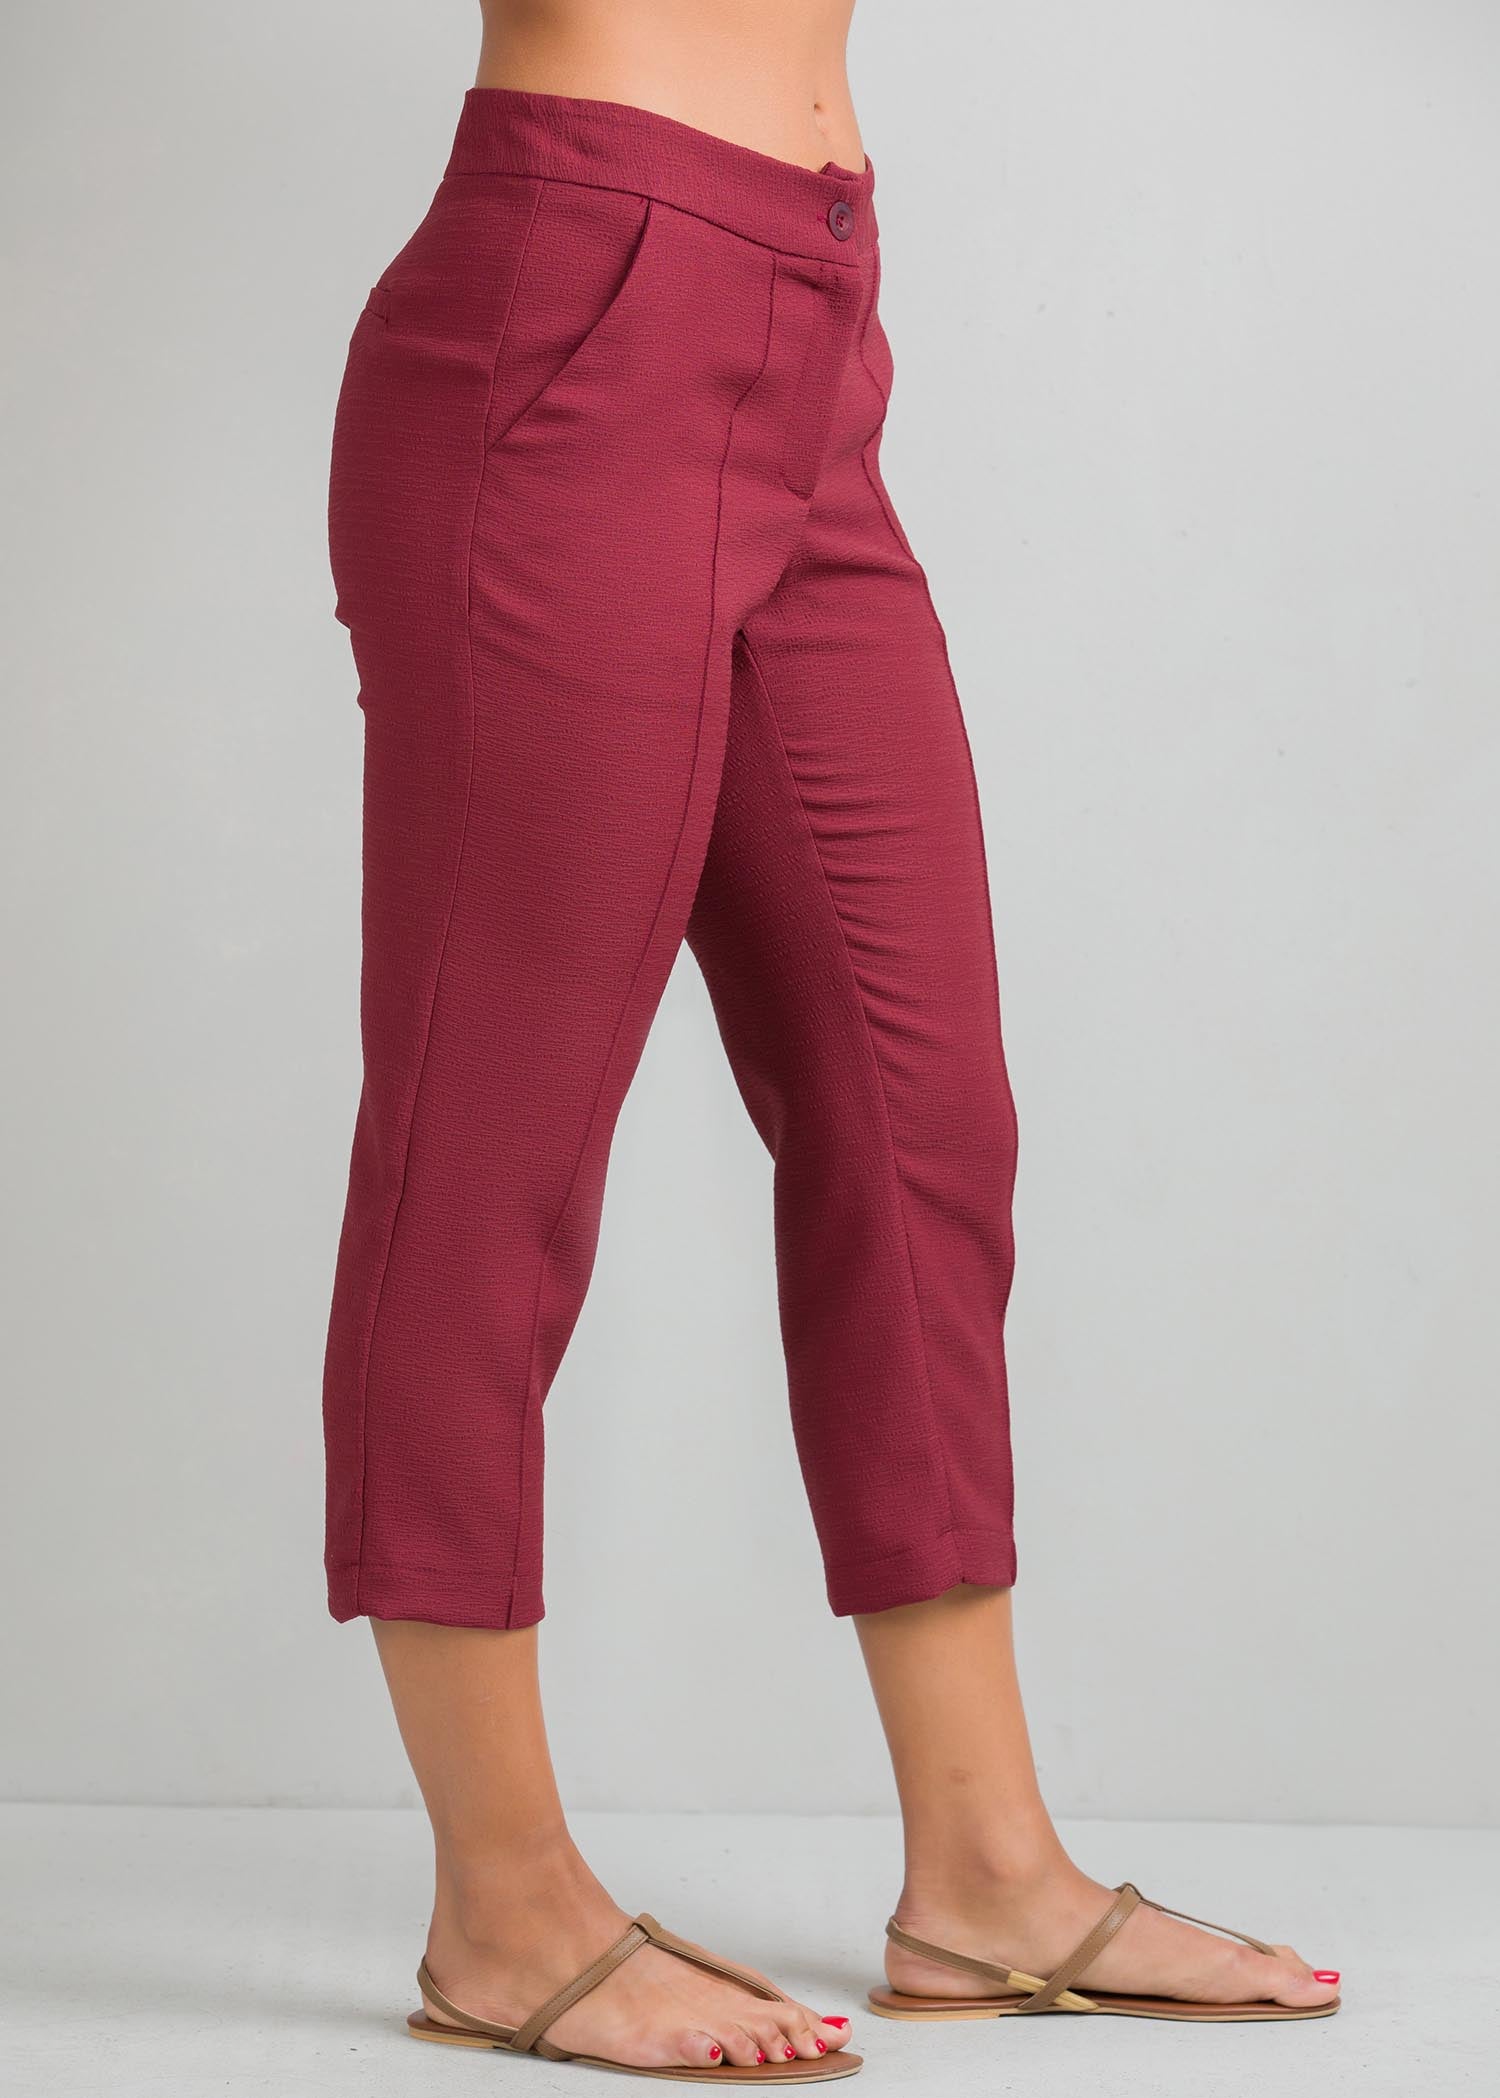 Cropped length pant